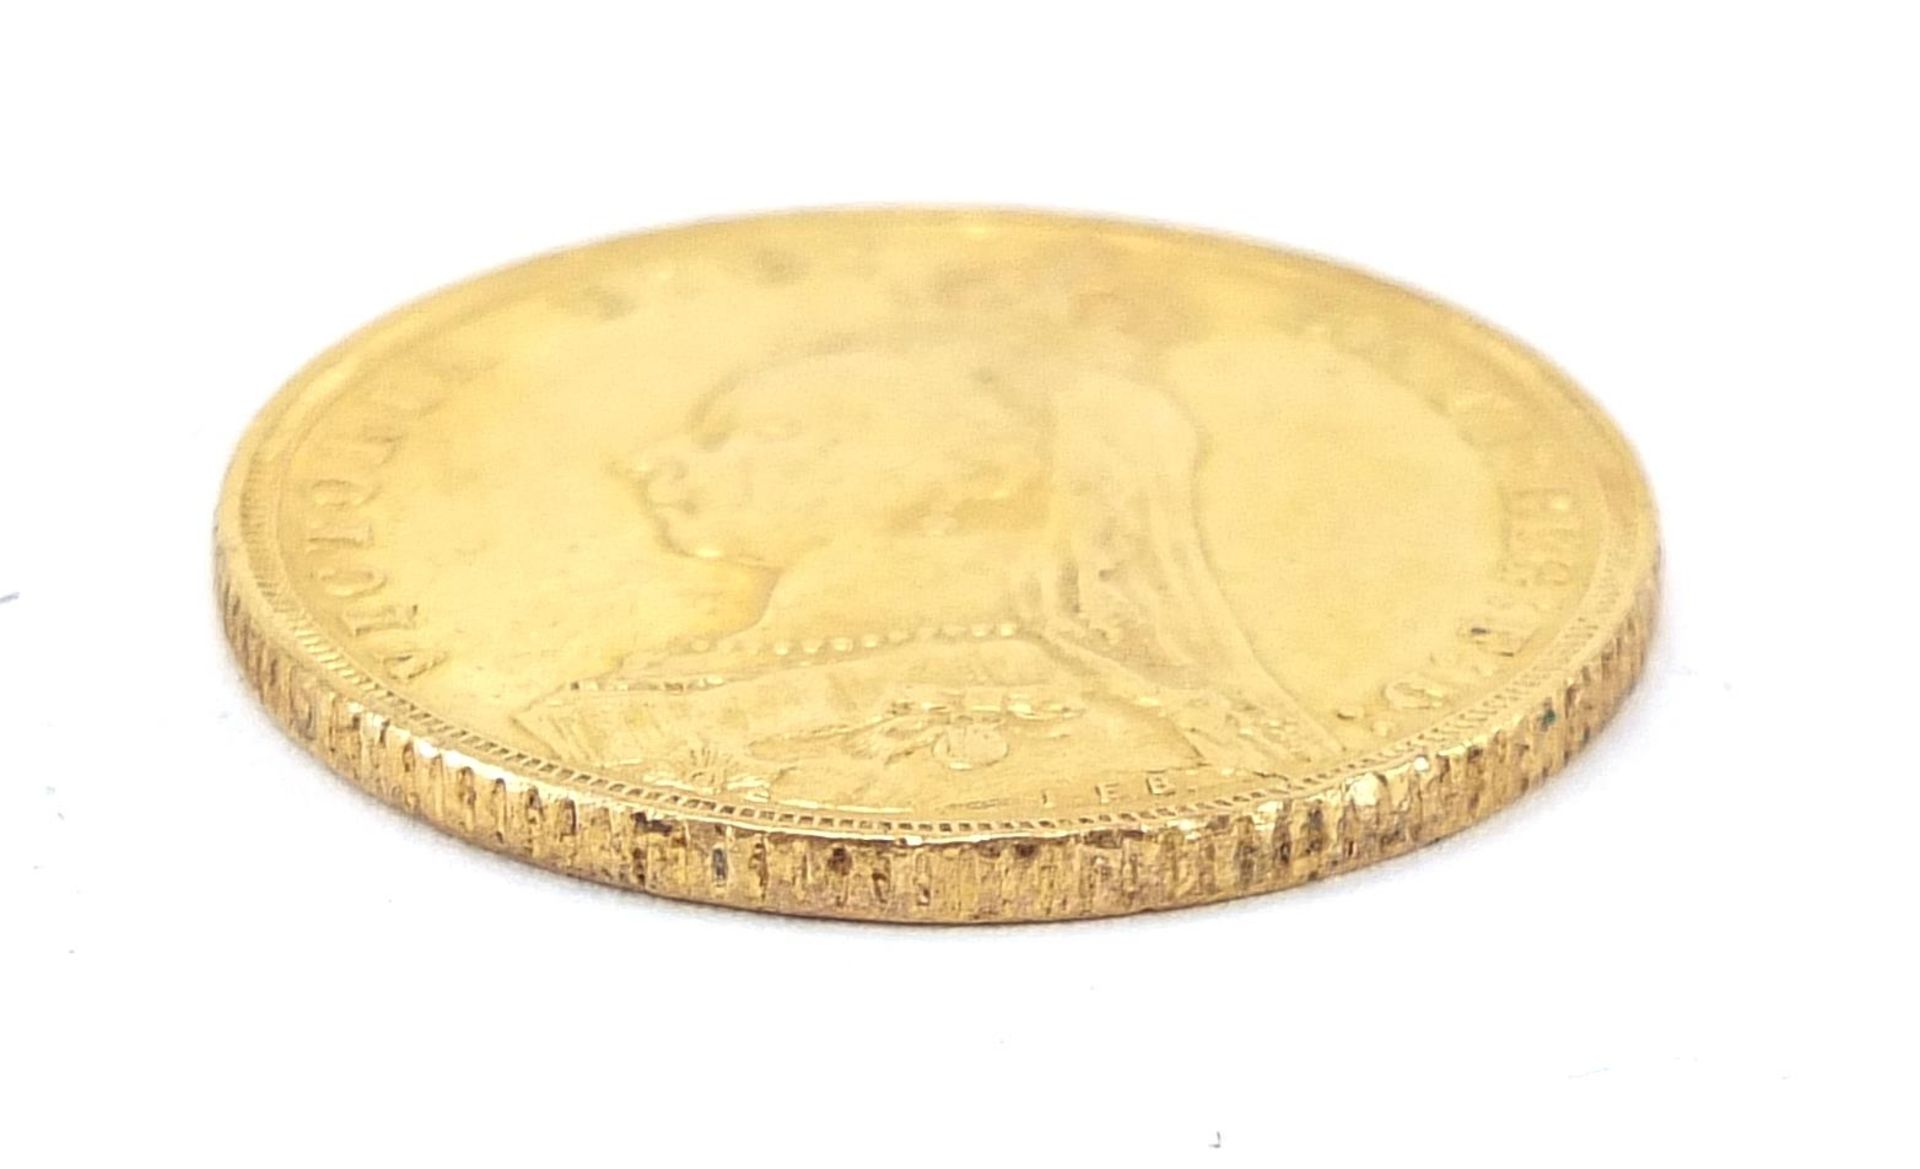 Queen Victoria Jubilee Head 1891 gold sovereign, Melbourne mint - this lot is sold without buyer's - Image 3 of 3